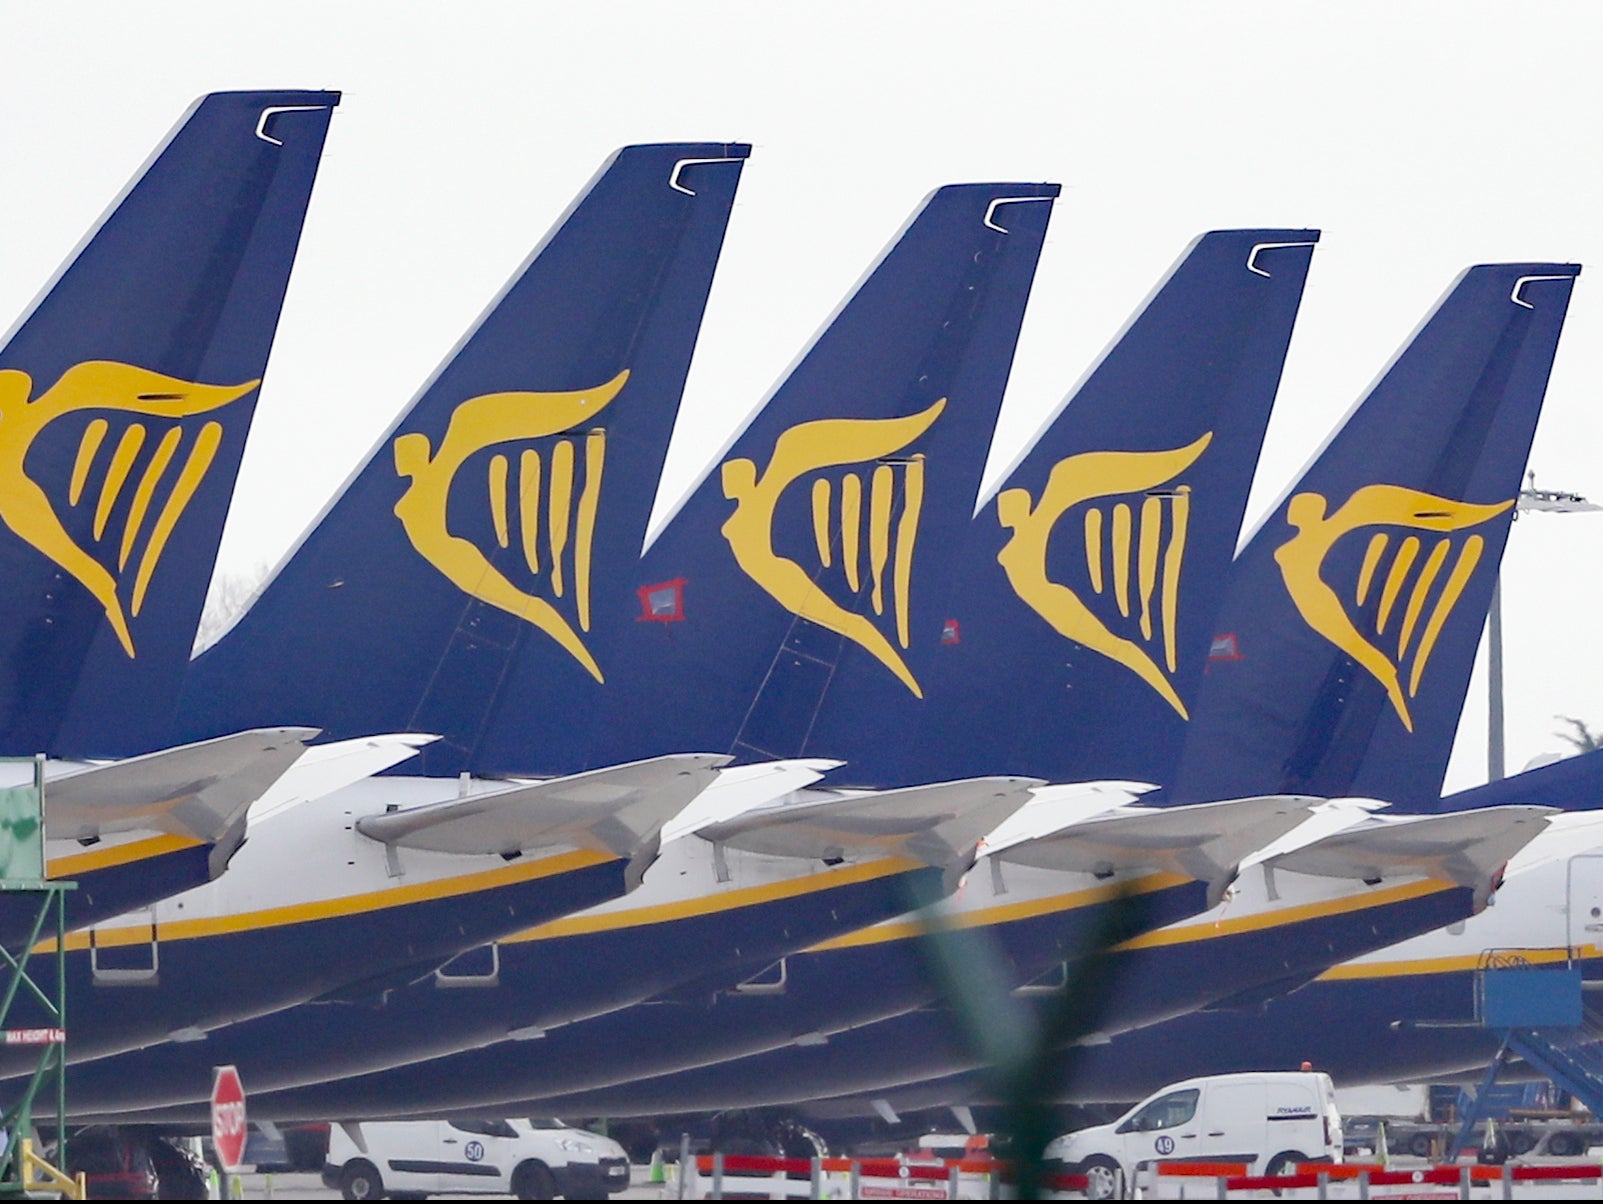 Much of Ryanair’s fleet has remained grounded over the past year due to the pandemic